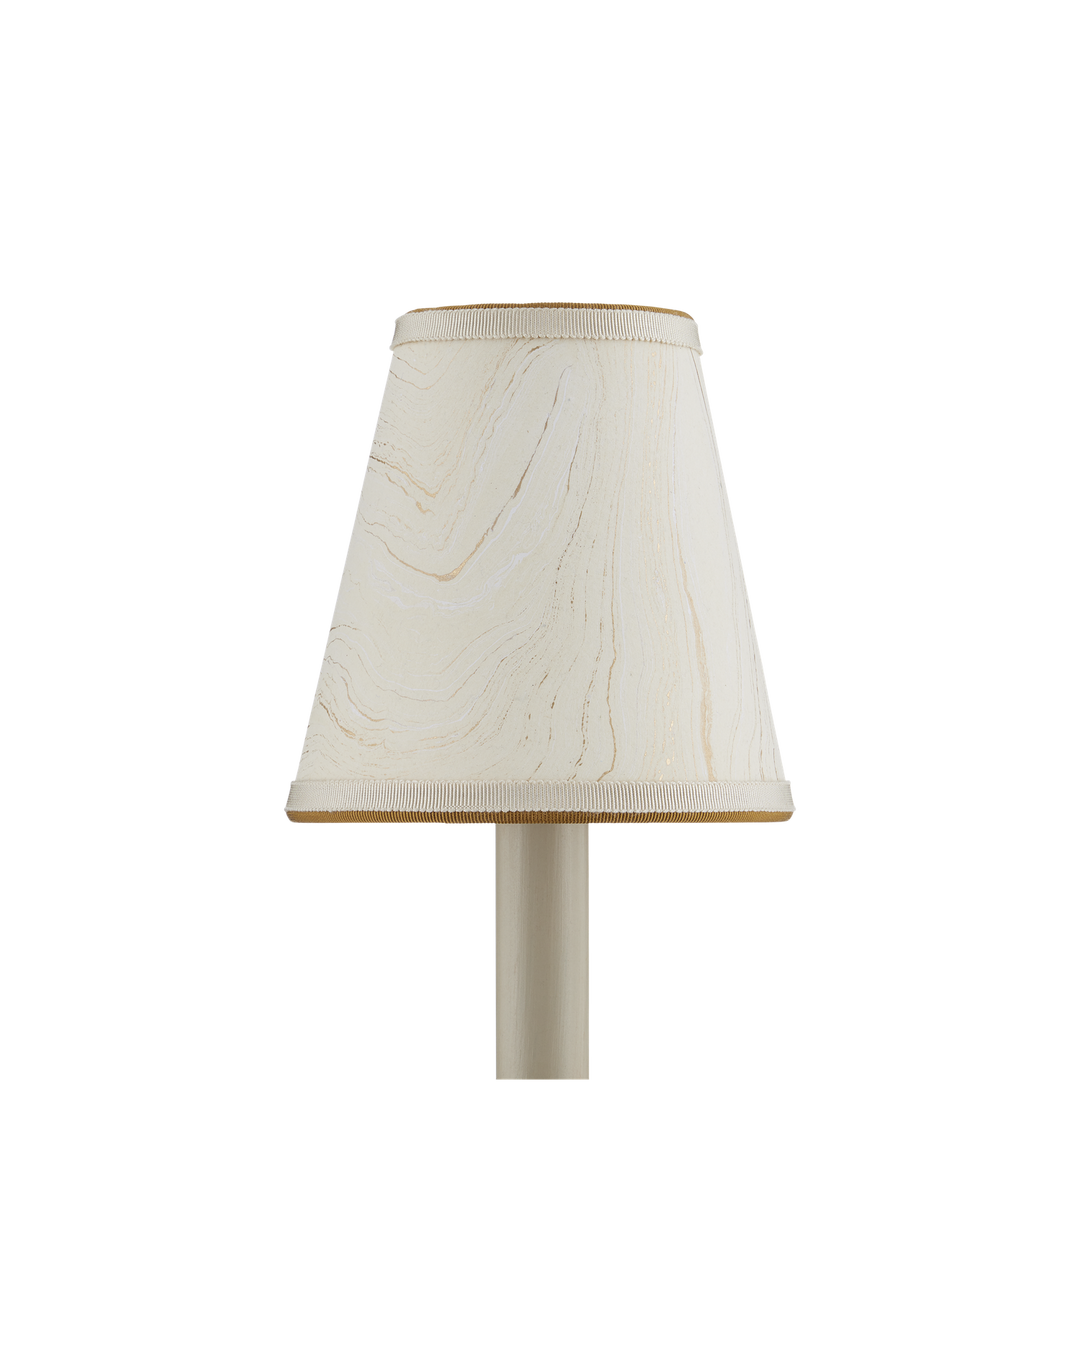 Marble Cream Paper Tapered Chandelier Shade